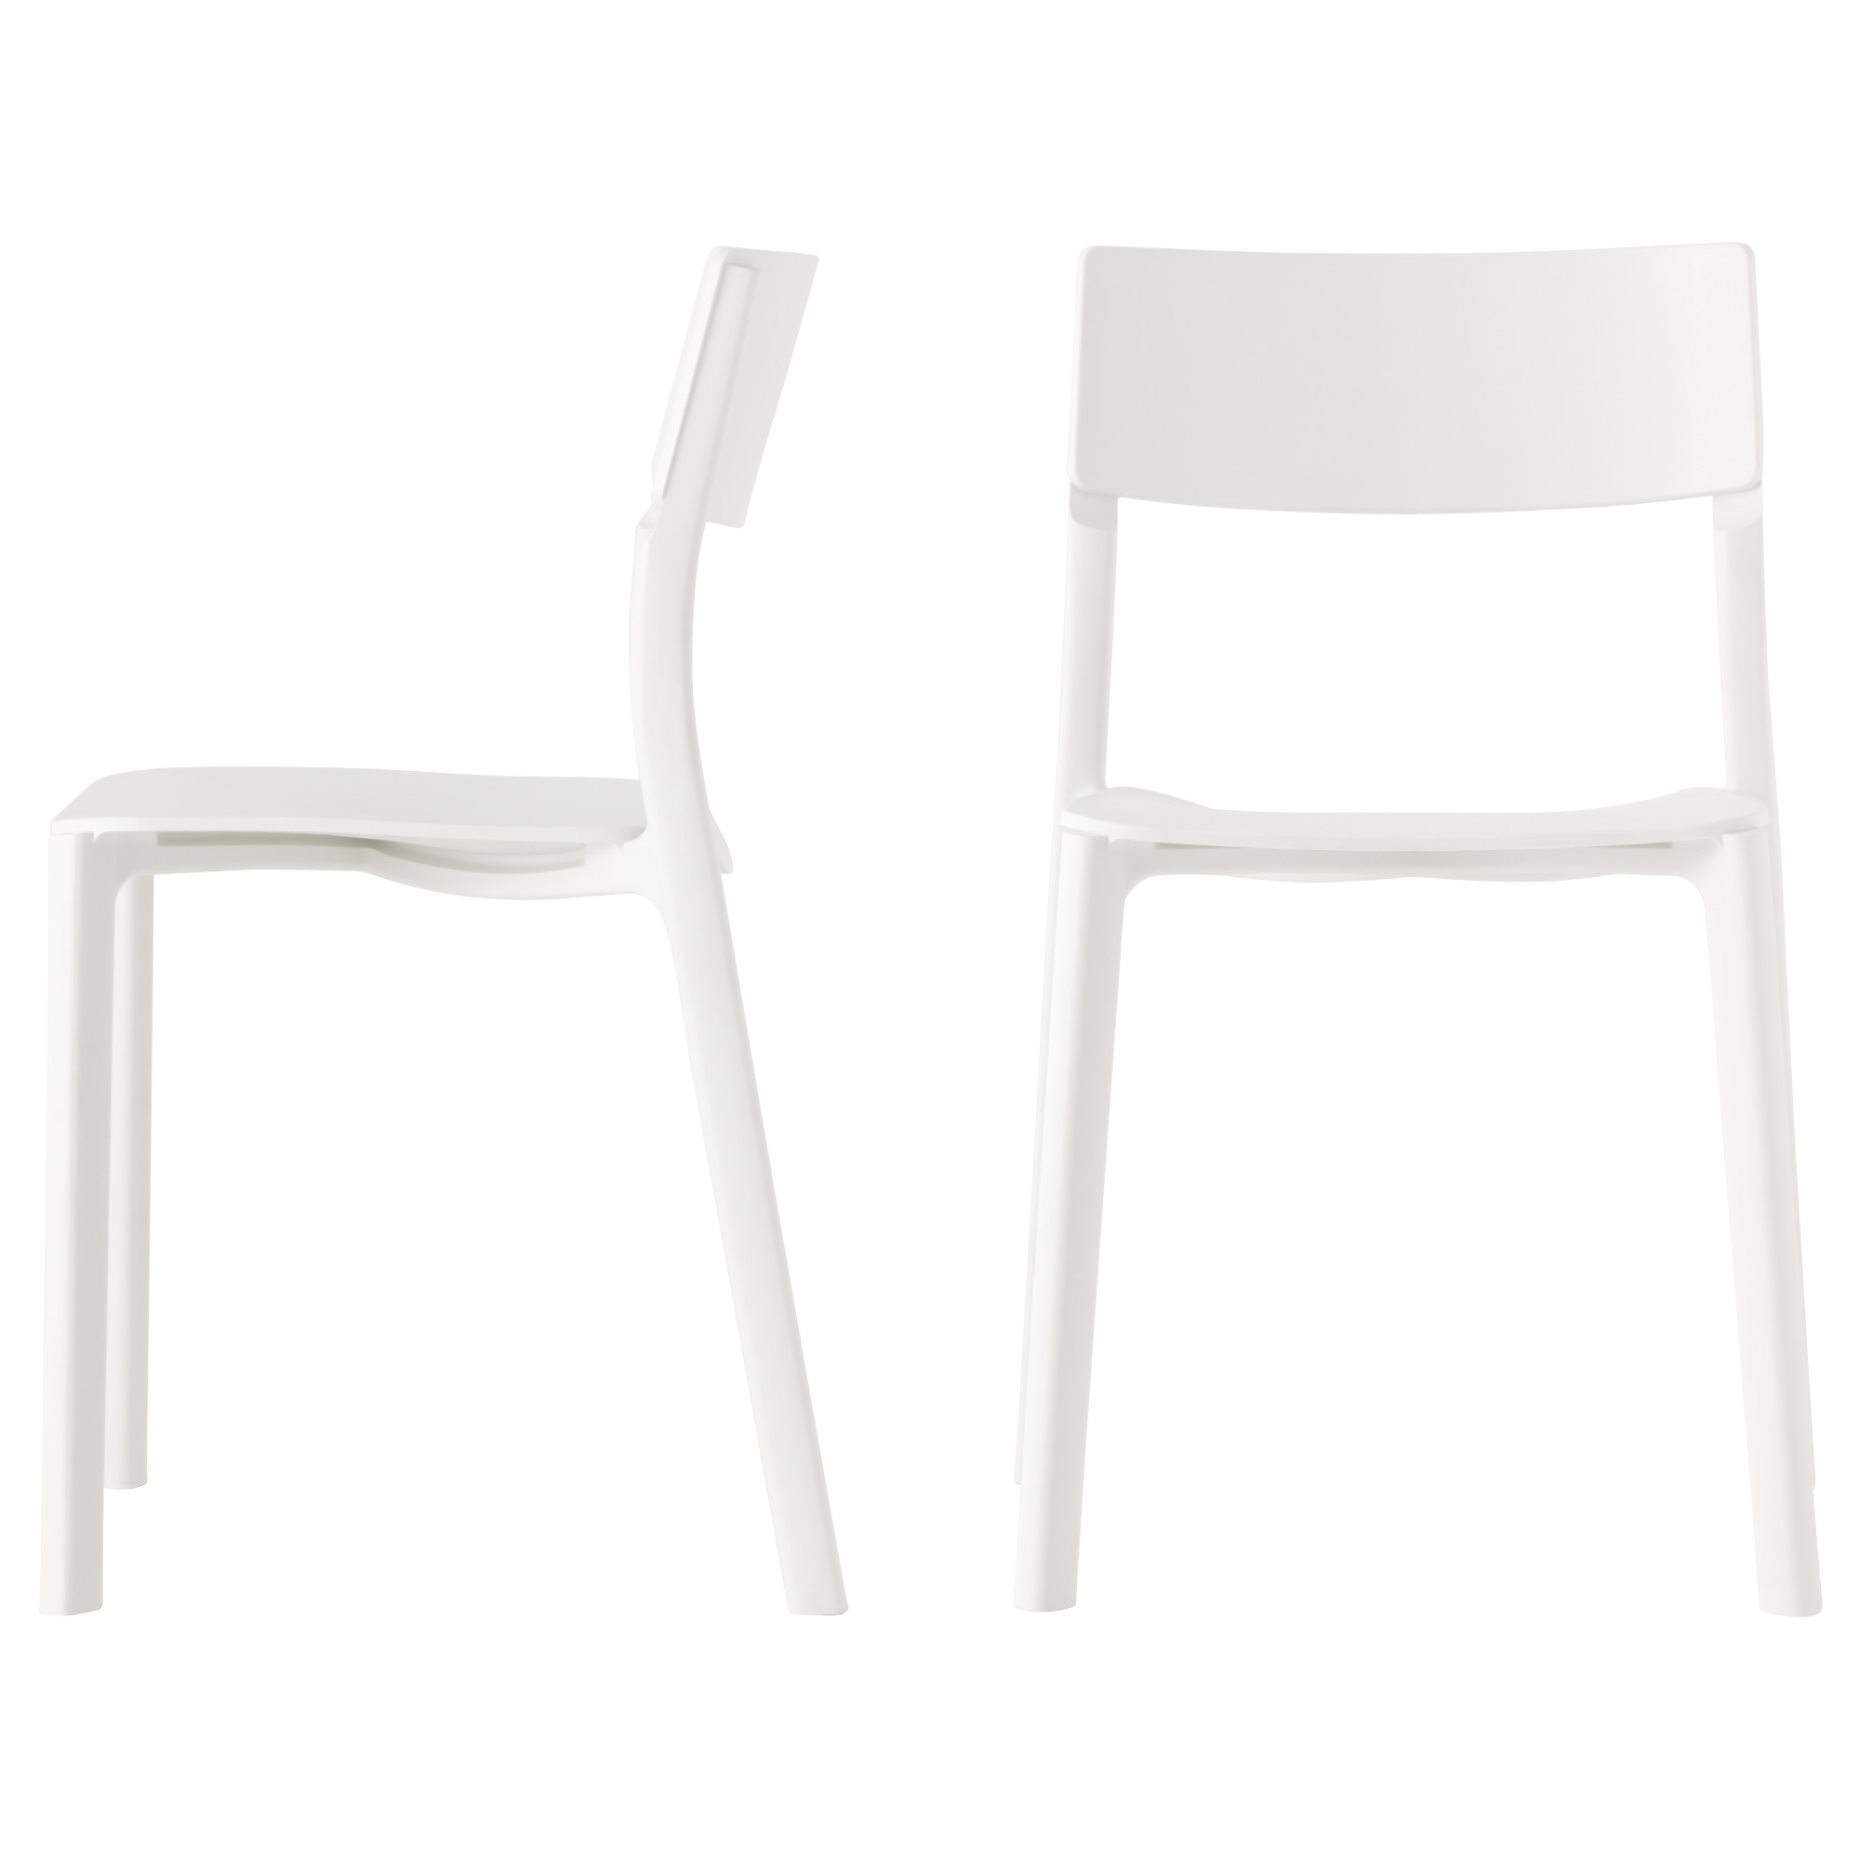 MELLTORP/JANIN, table and 2 chairs, 75x75 cm, 995.564.82